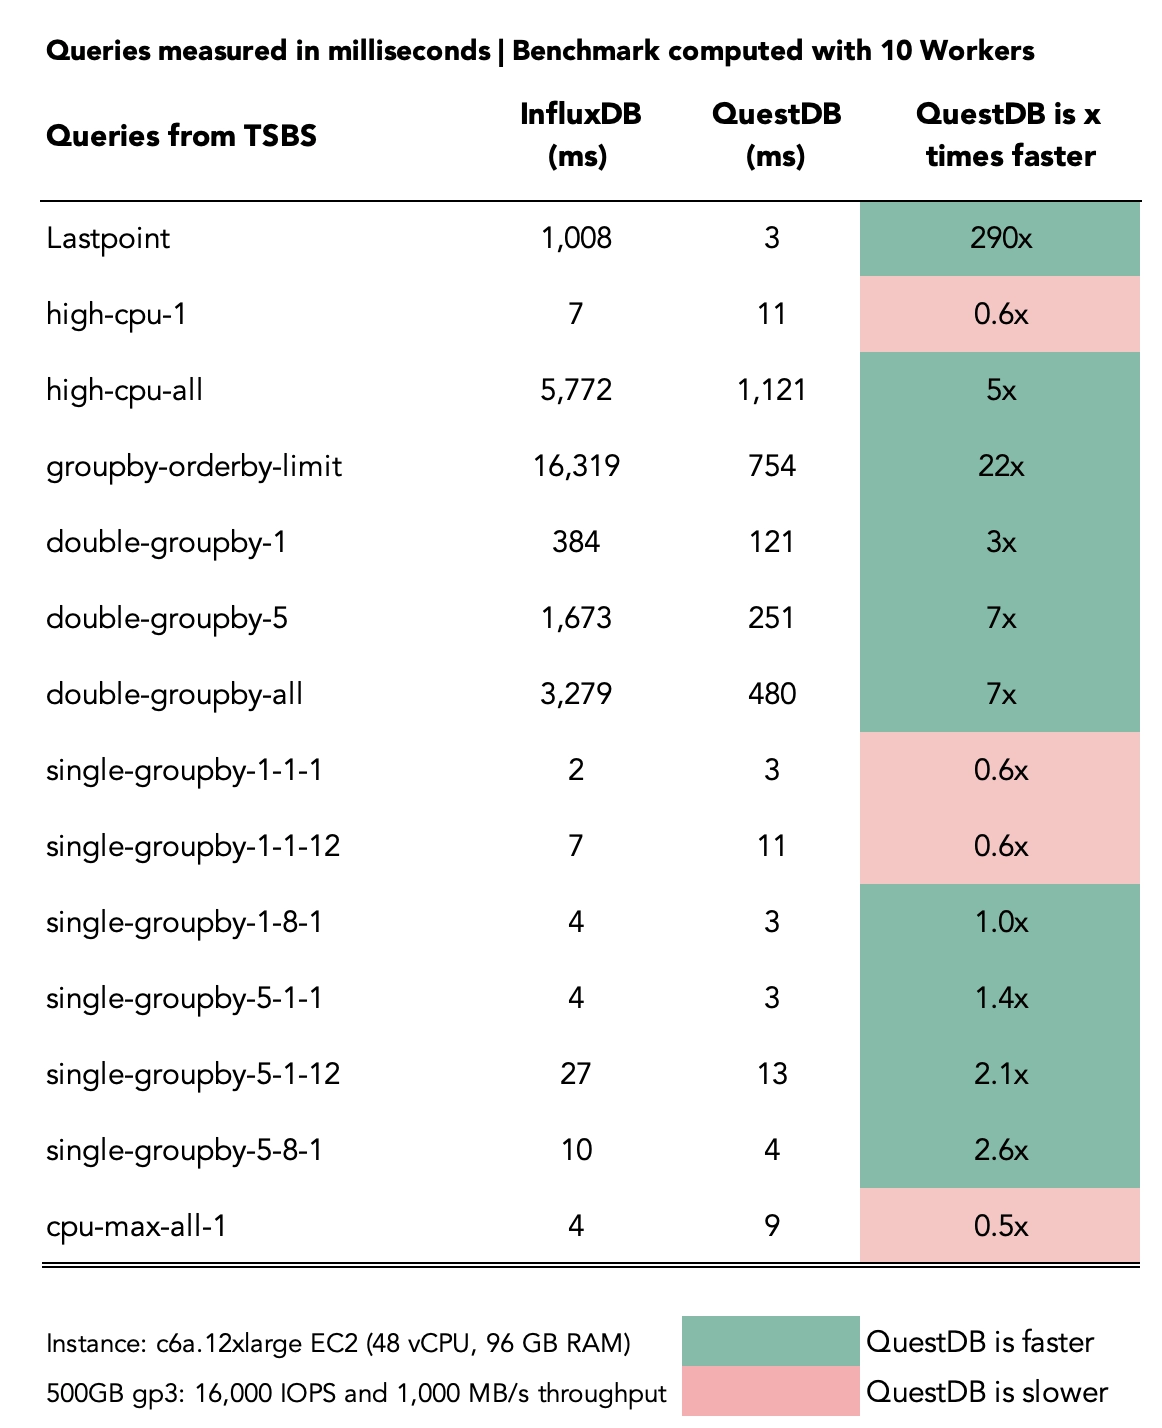 Query performance results comparing QuestDB and InfluxDB